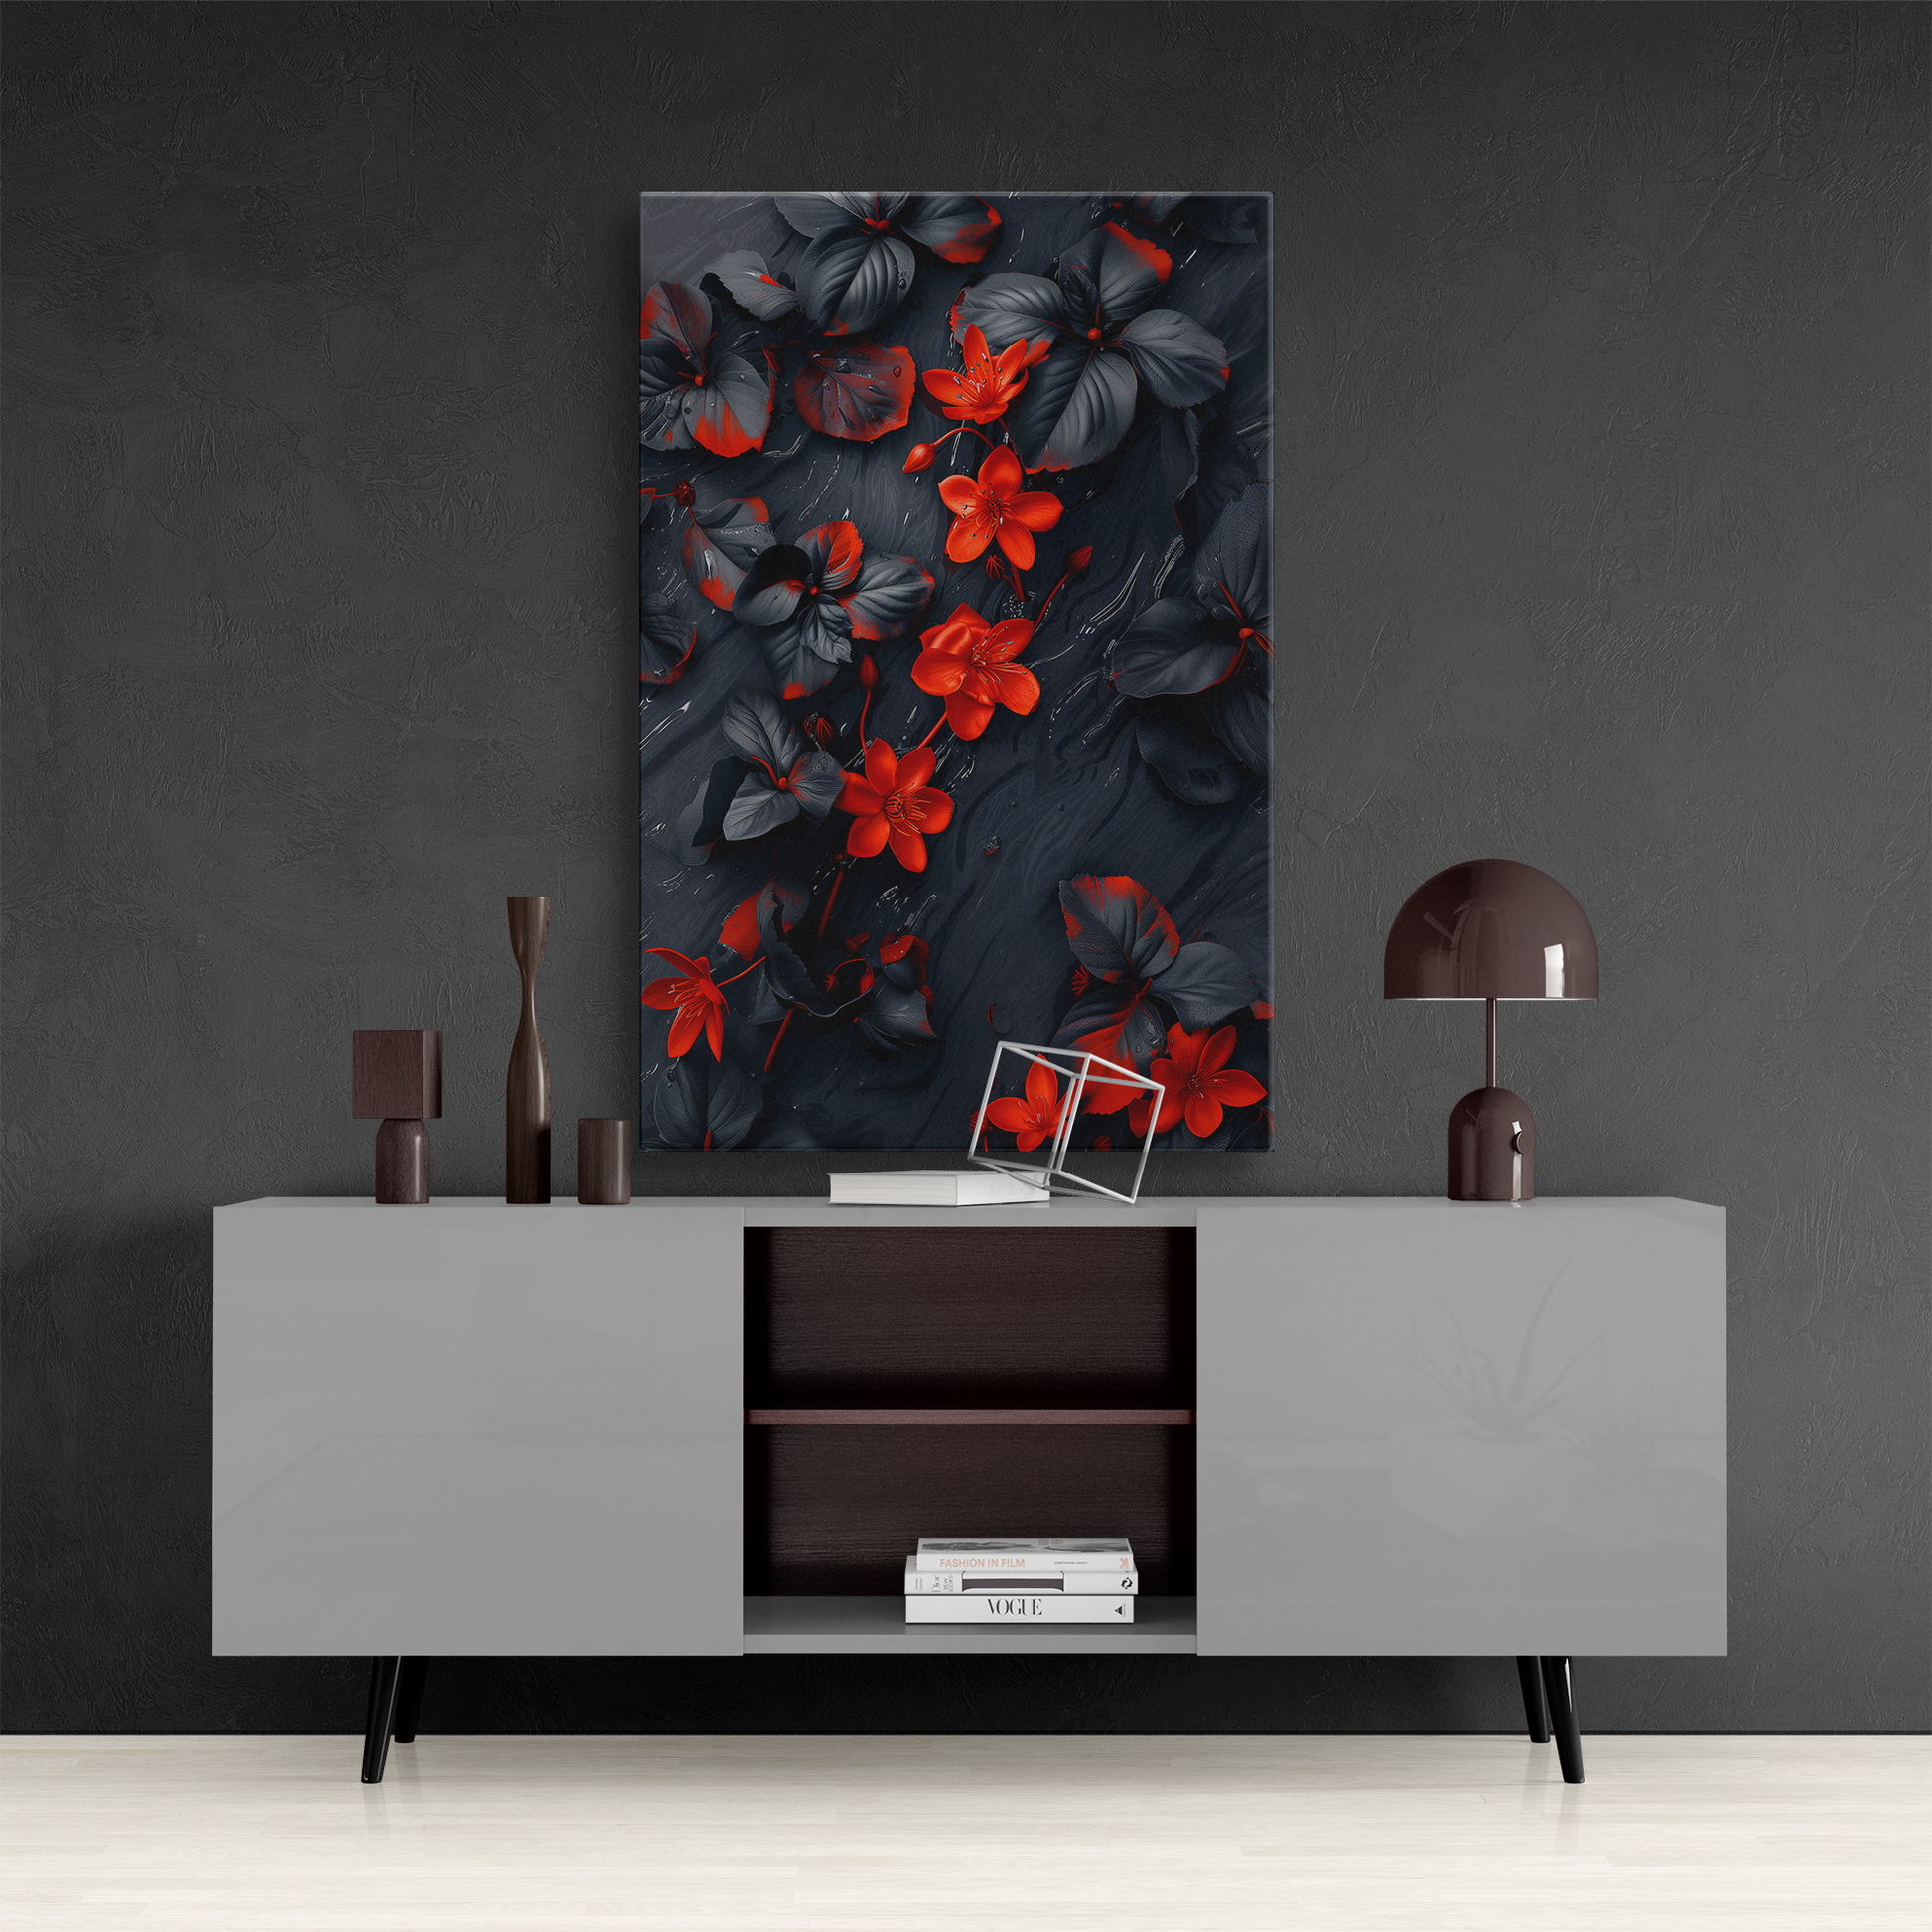 Midnight Bloom (Canvas)Discover Midnight Bloom at RimaGallery: a premium, eco-friendly canvas celebrating quality and sustainability. Elevate your space with vibrant, lasting art.RimaGallery